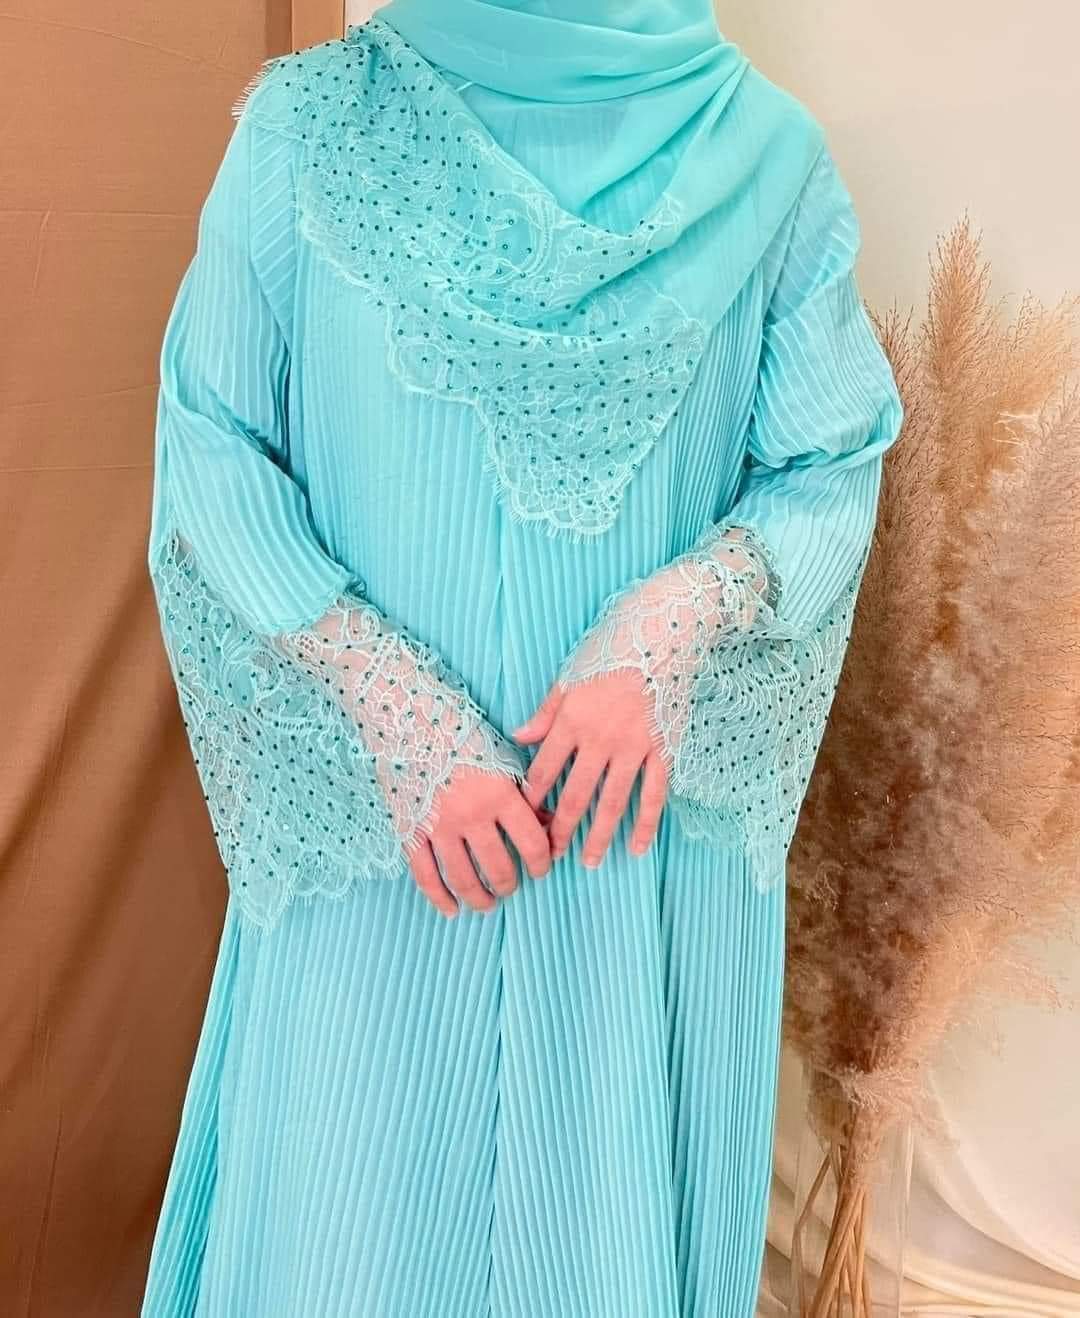 Blue Abaya with Laces in Hand Abaya